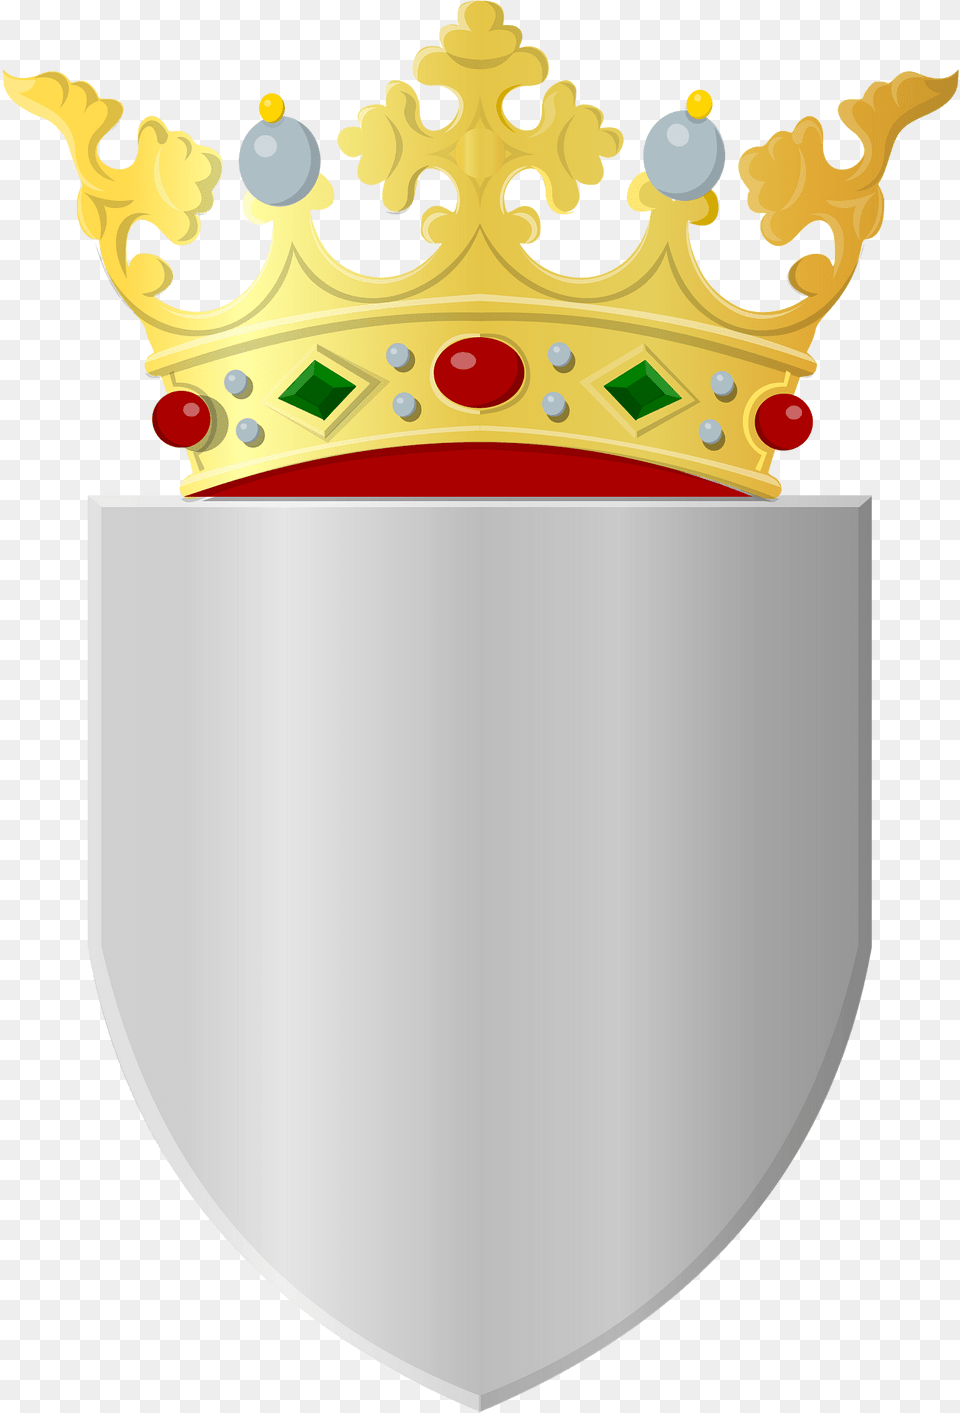 Silver Shield With Golden Crown Clipart, Accessories, Jewelry Png Image